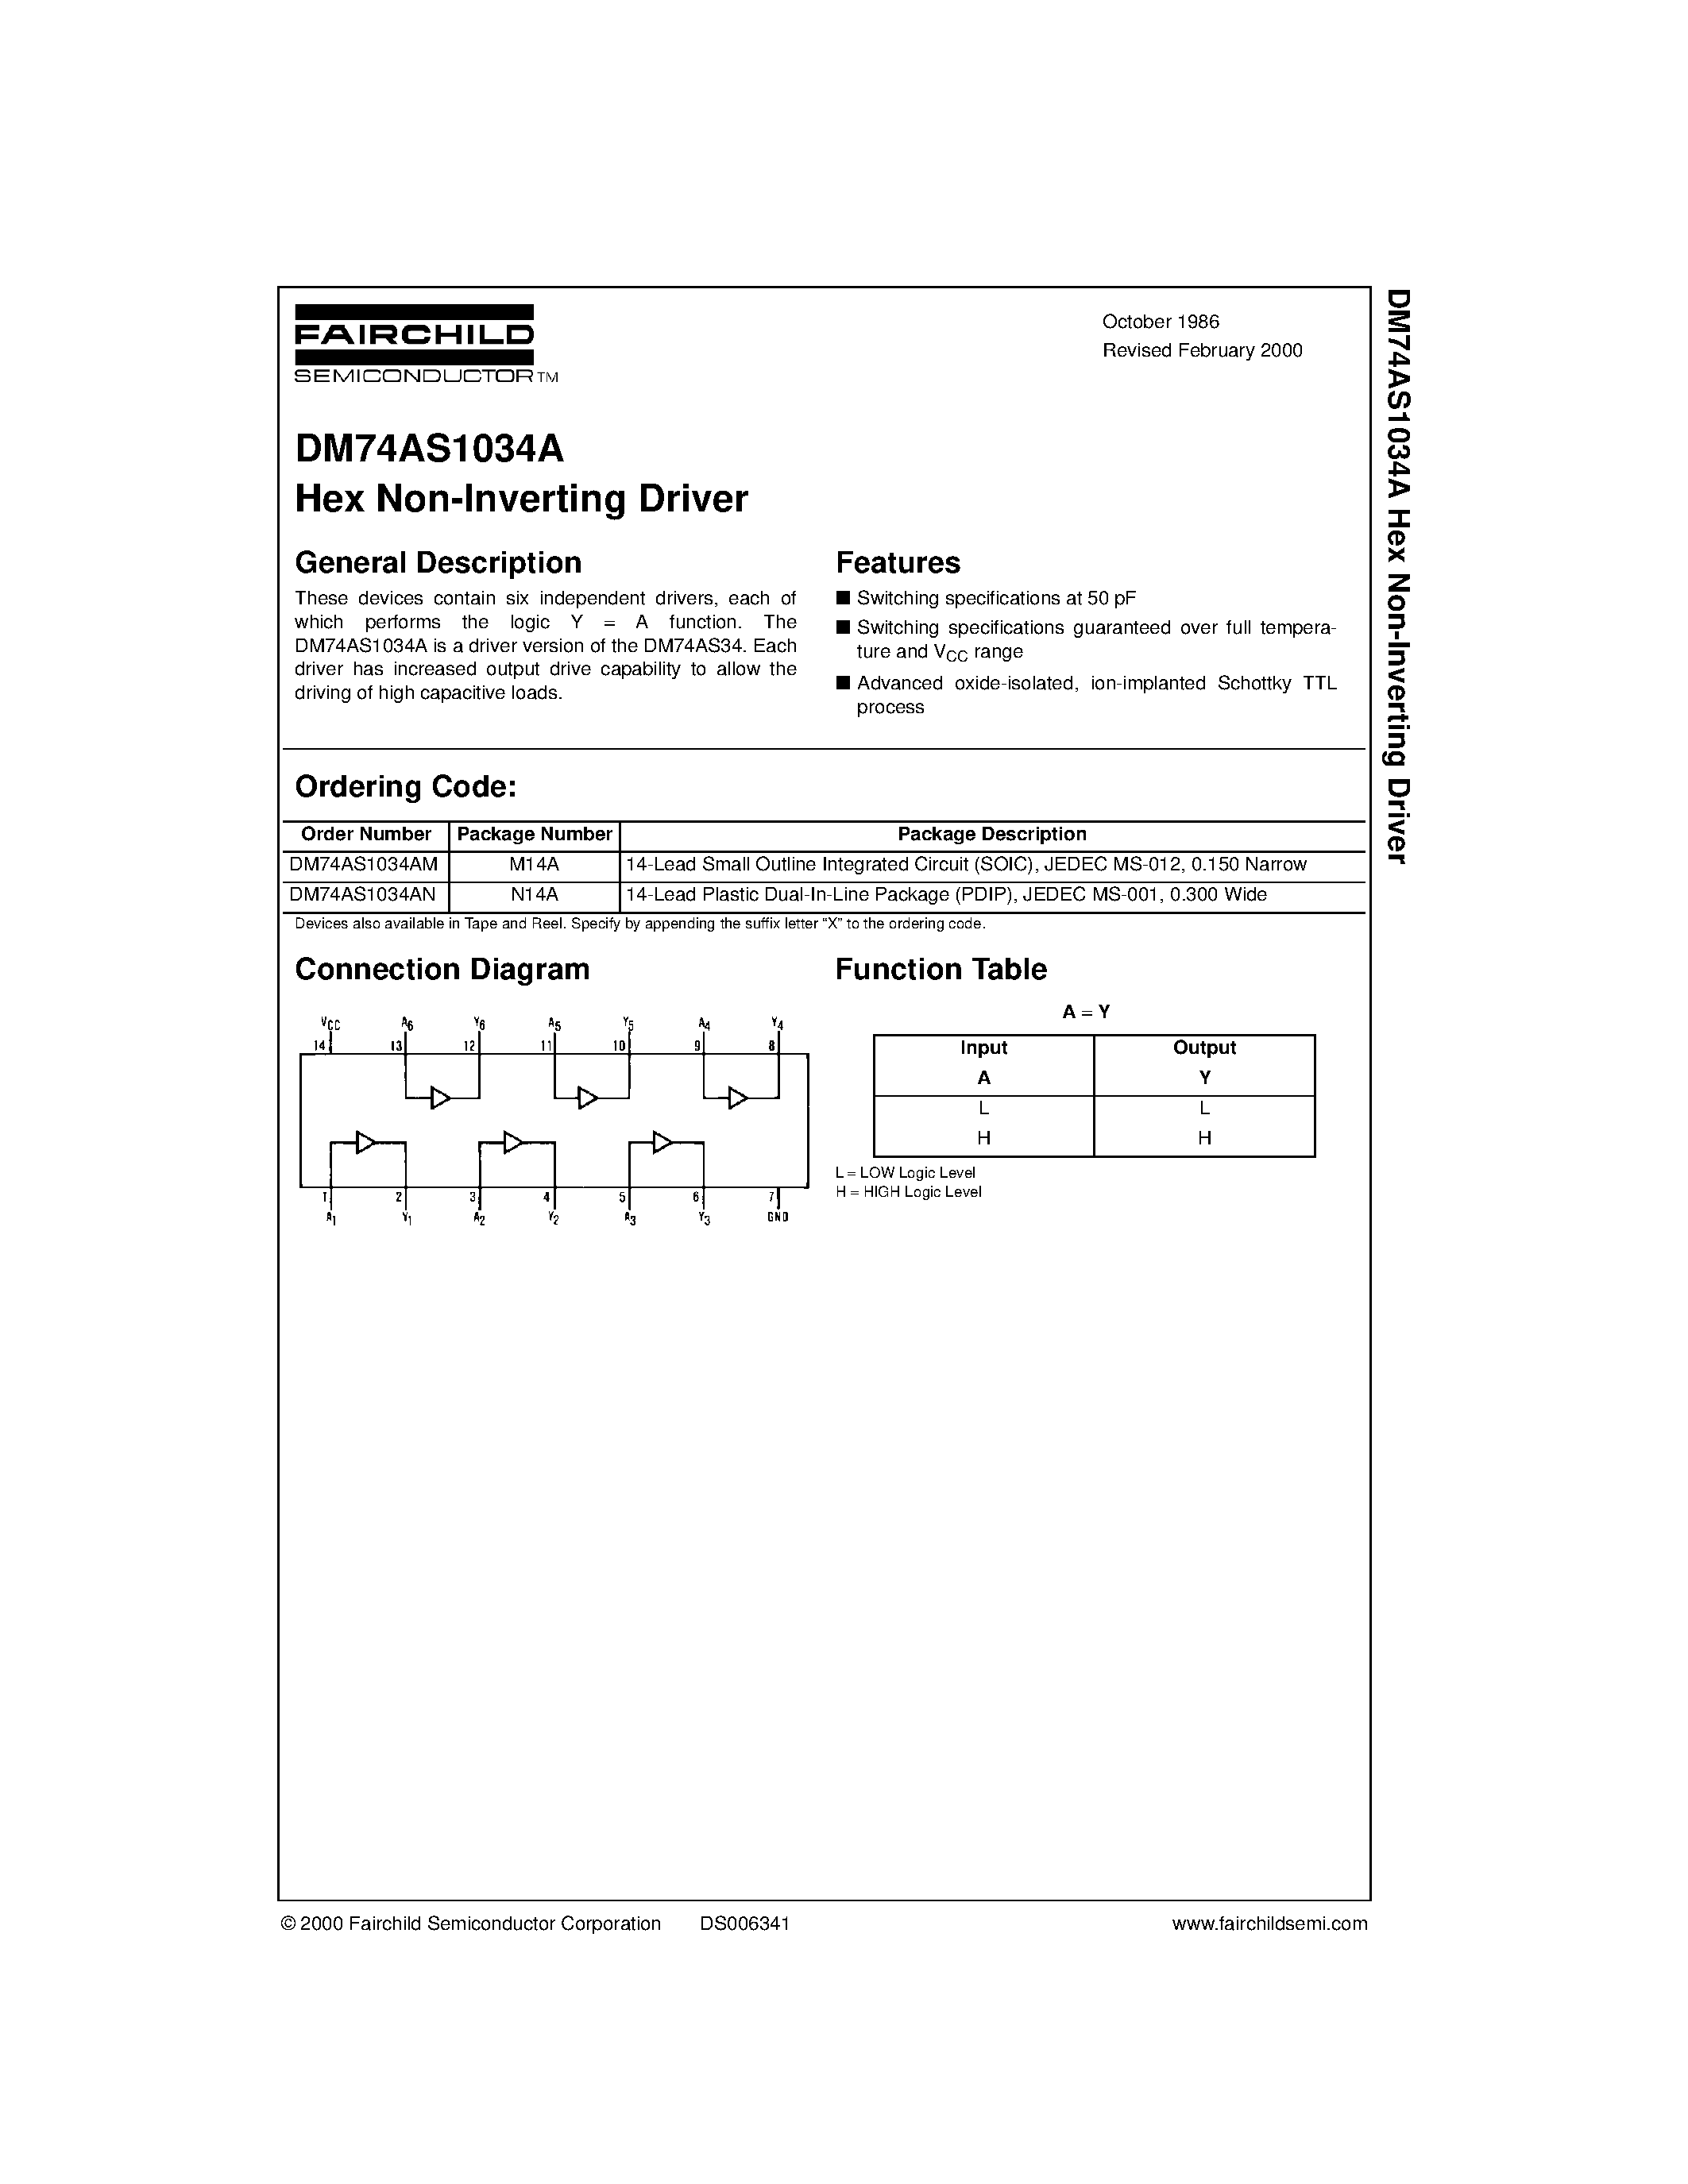 Datasheet DM74AS1034 - Hex Non-Inverting Driver page 1